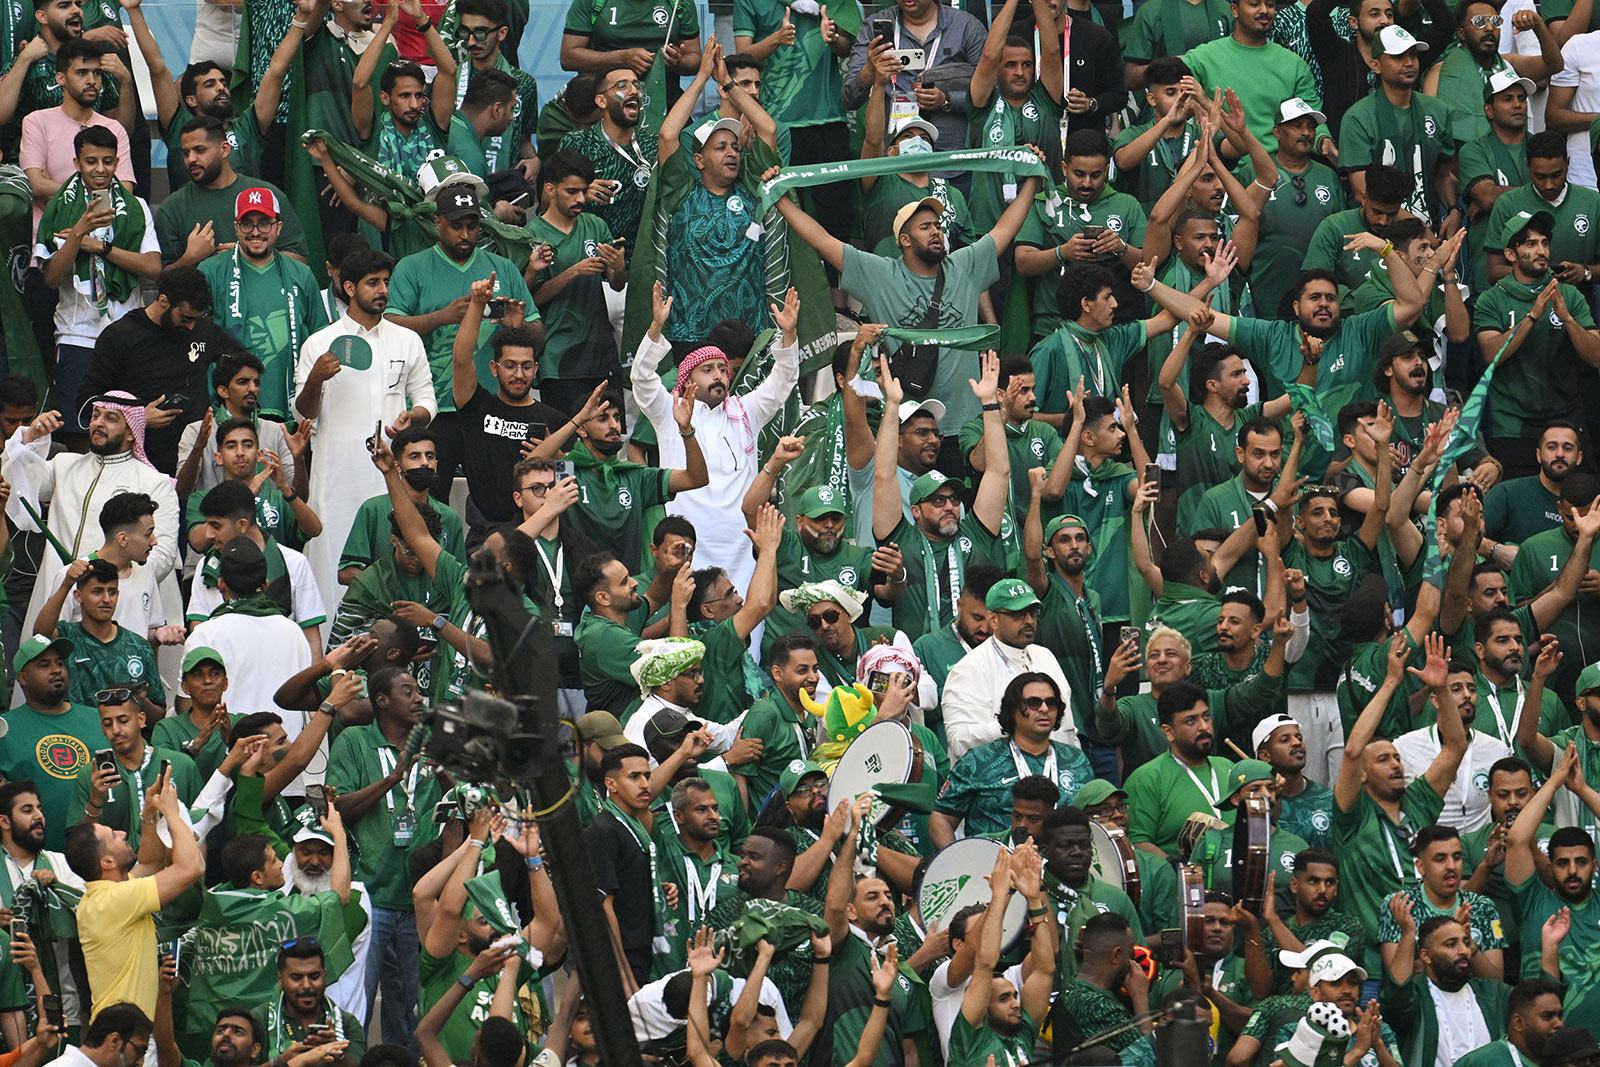 Saudi Arabia fans celebrate their team's first goal during the match against Argentina on November 22.